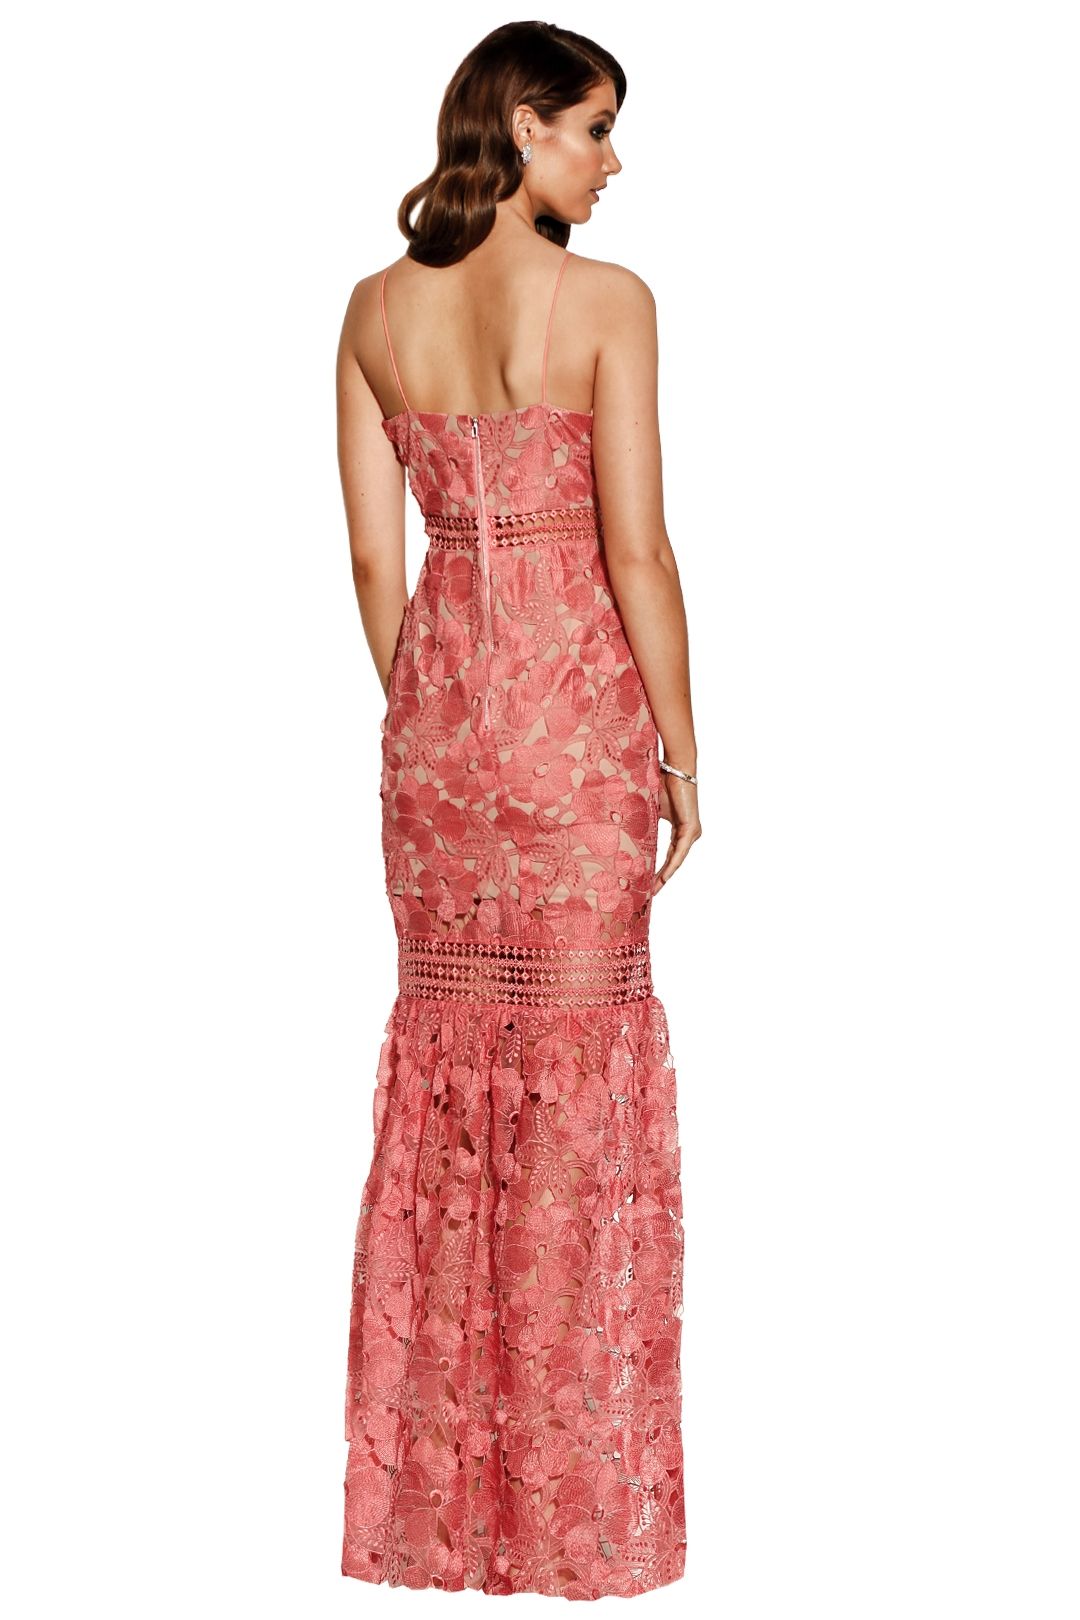 Grace and Hart - Serene Gown - Rose - Back